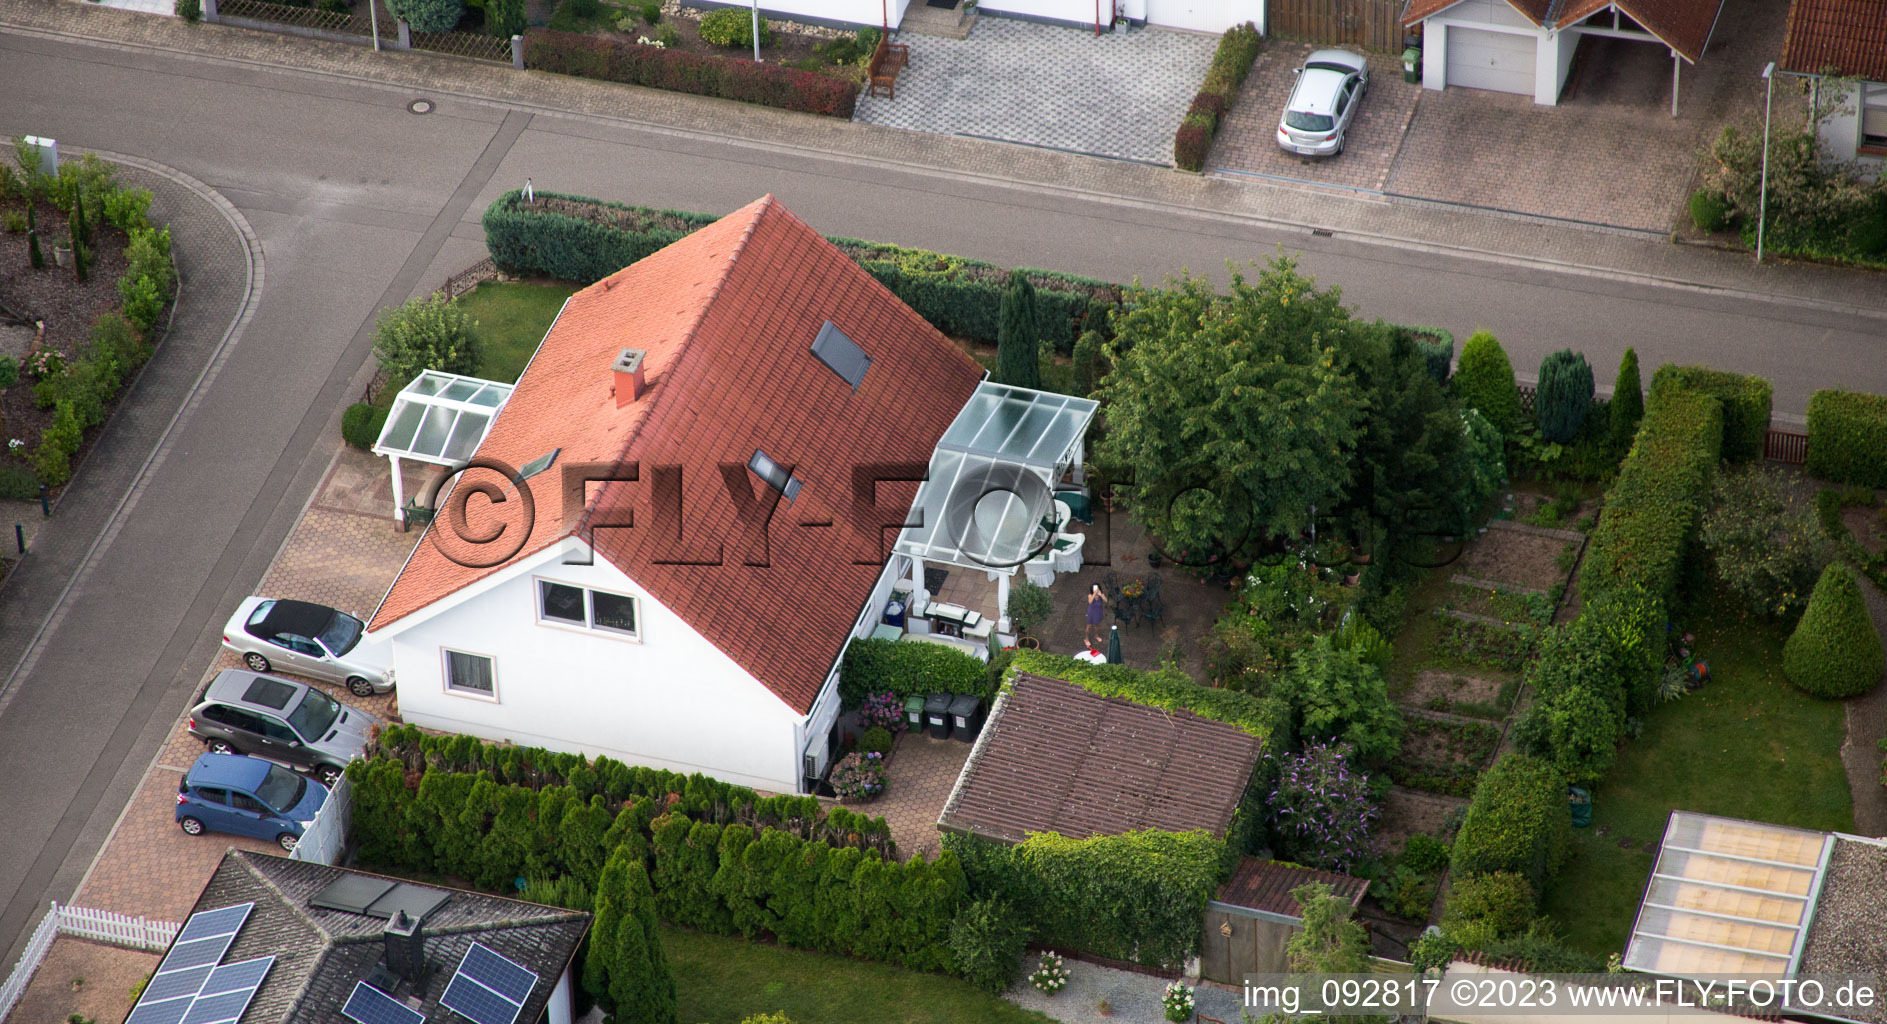 Aerial view of Maxburgstr in the district Billigheim in Billigheim-Ingenheim in the state Rhineland-Palatinate, Germany